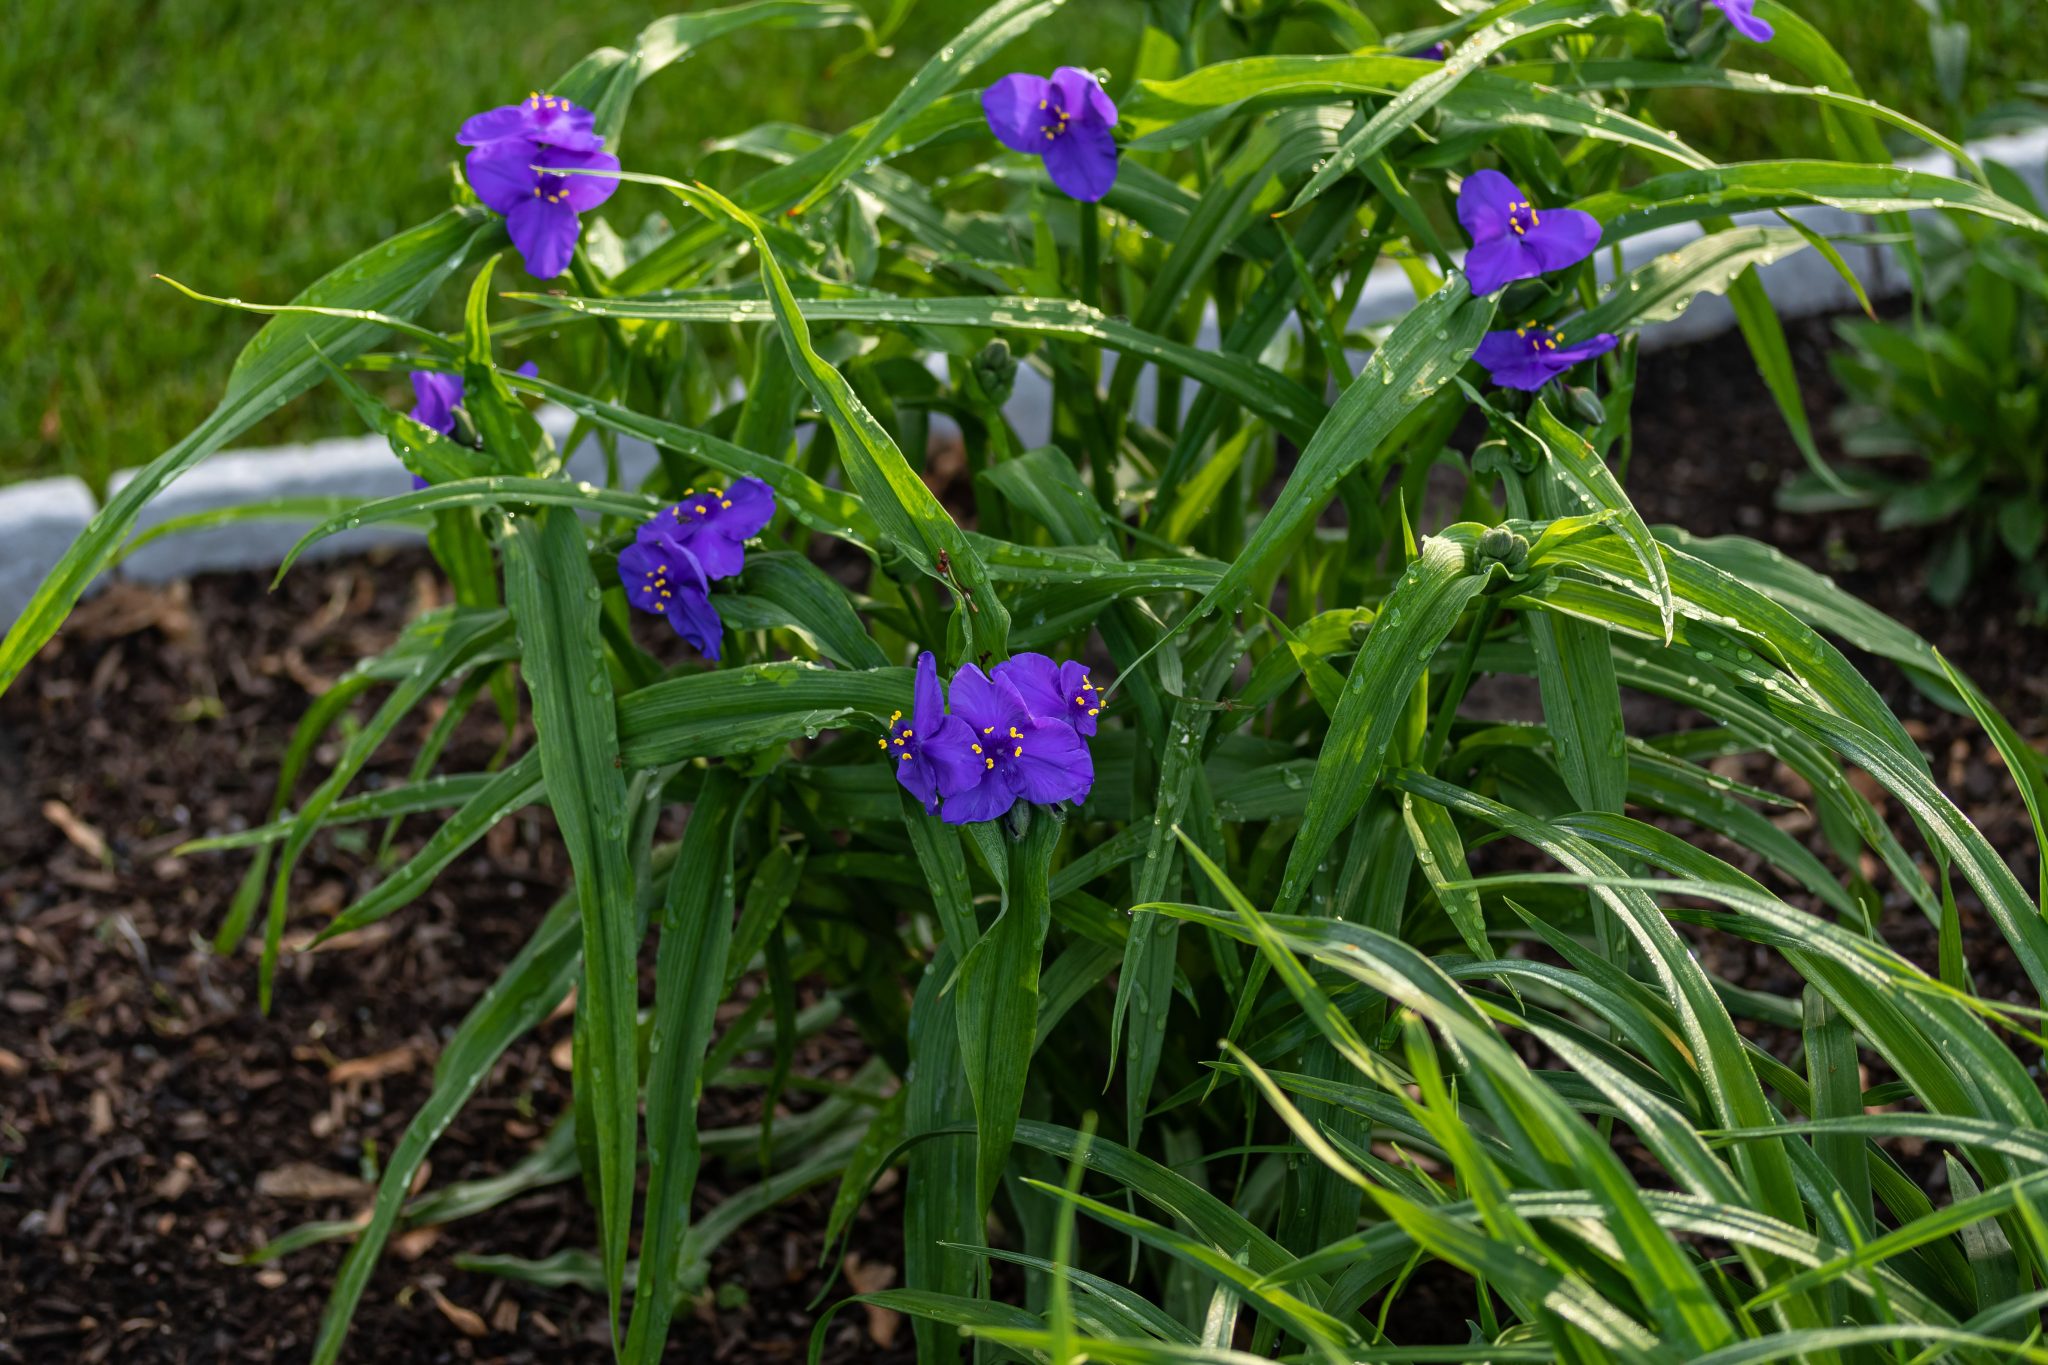 T. Andersoniana Group plant with grassy leaves and purple flowers